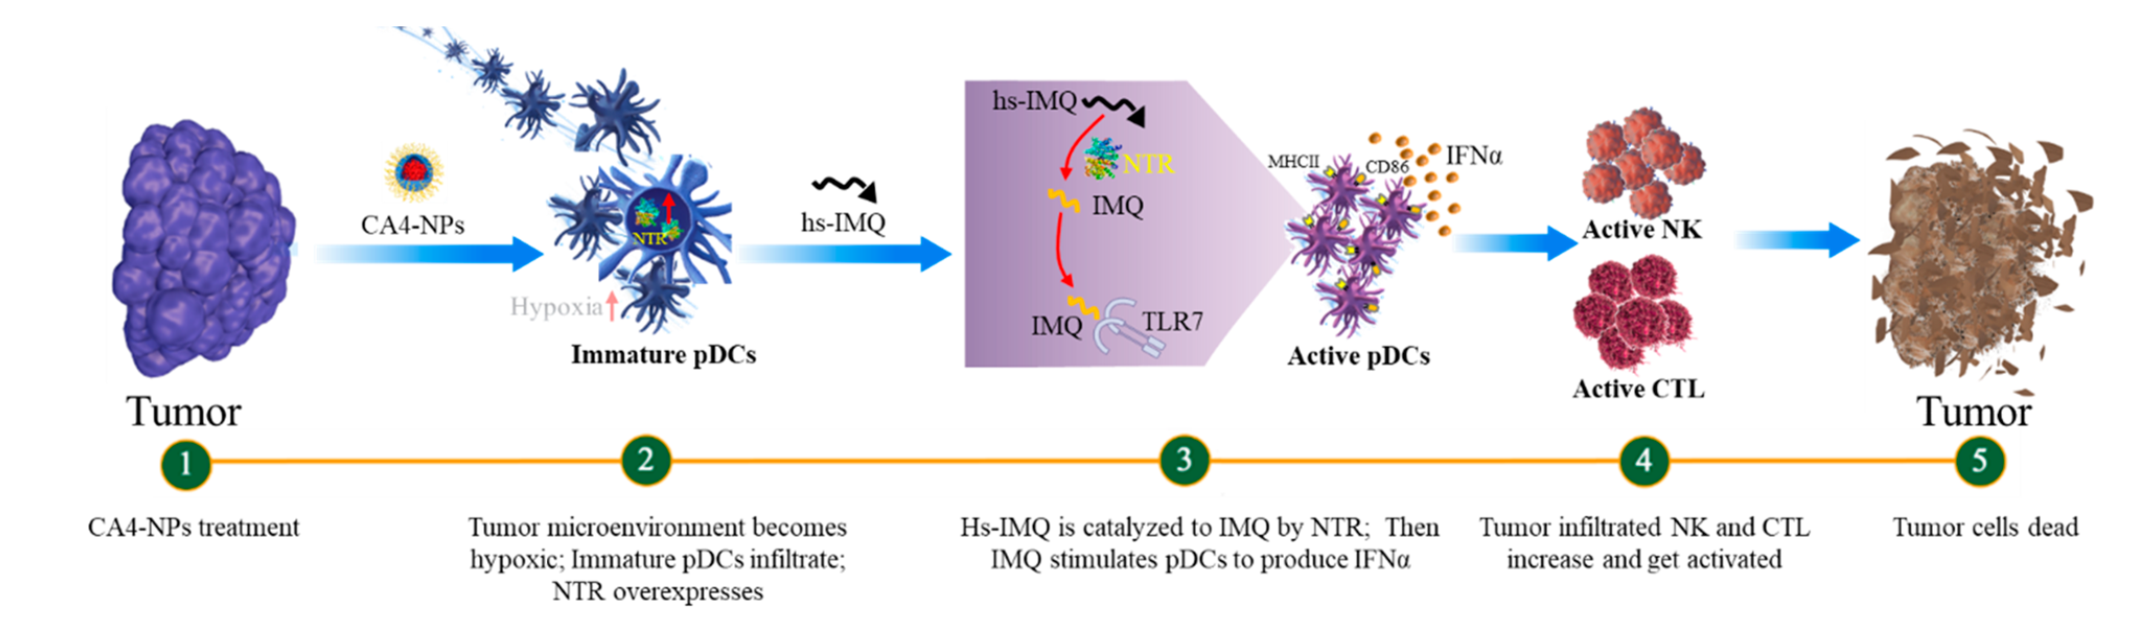 Combretastatin A4 Nanoparticles Combined with Hypoxia-Sensitive Imiquimod: A New Paradigm for the Modulation of Host Immunological Responses during Cancer Treatment